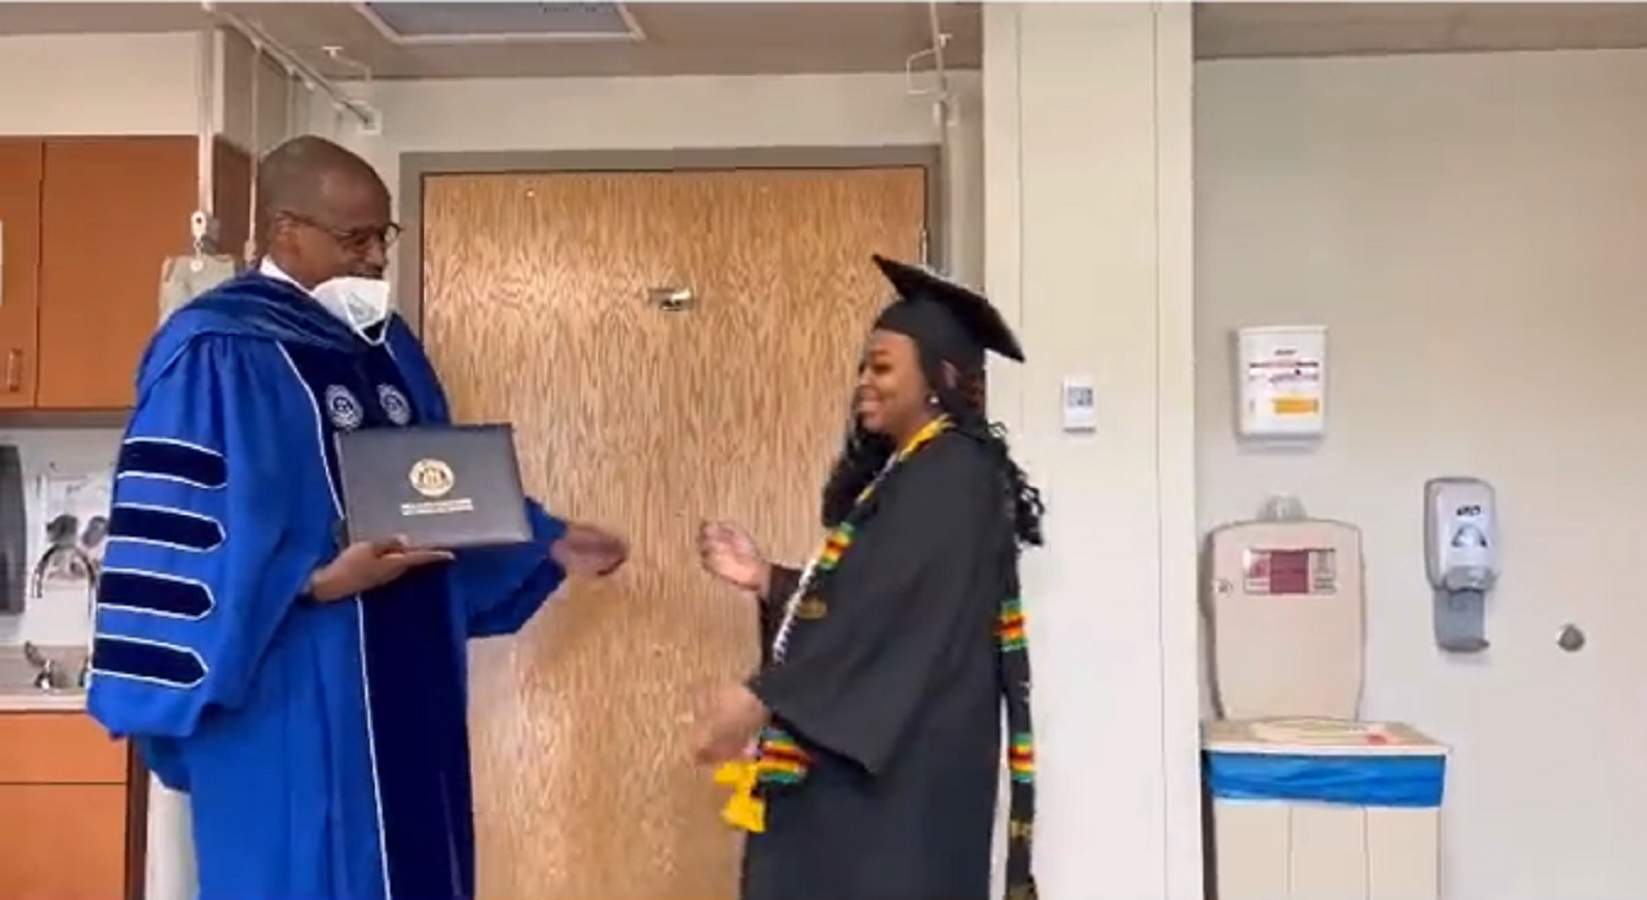 Woman receives college degree in hospital room